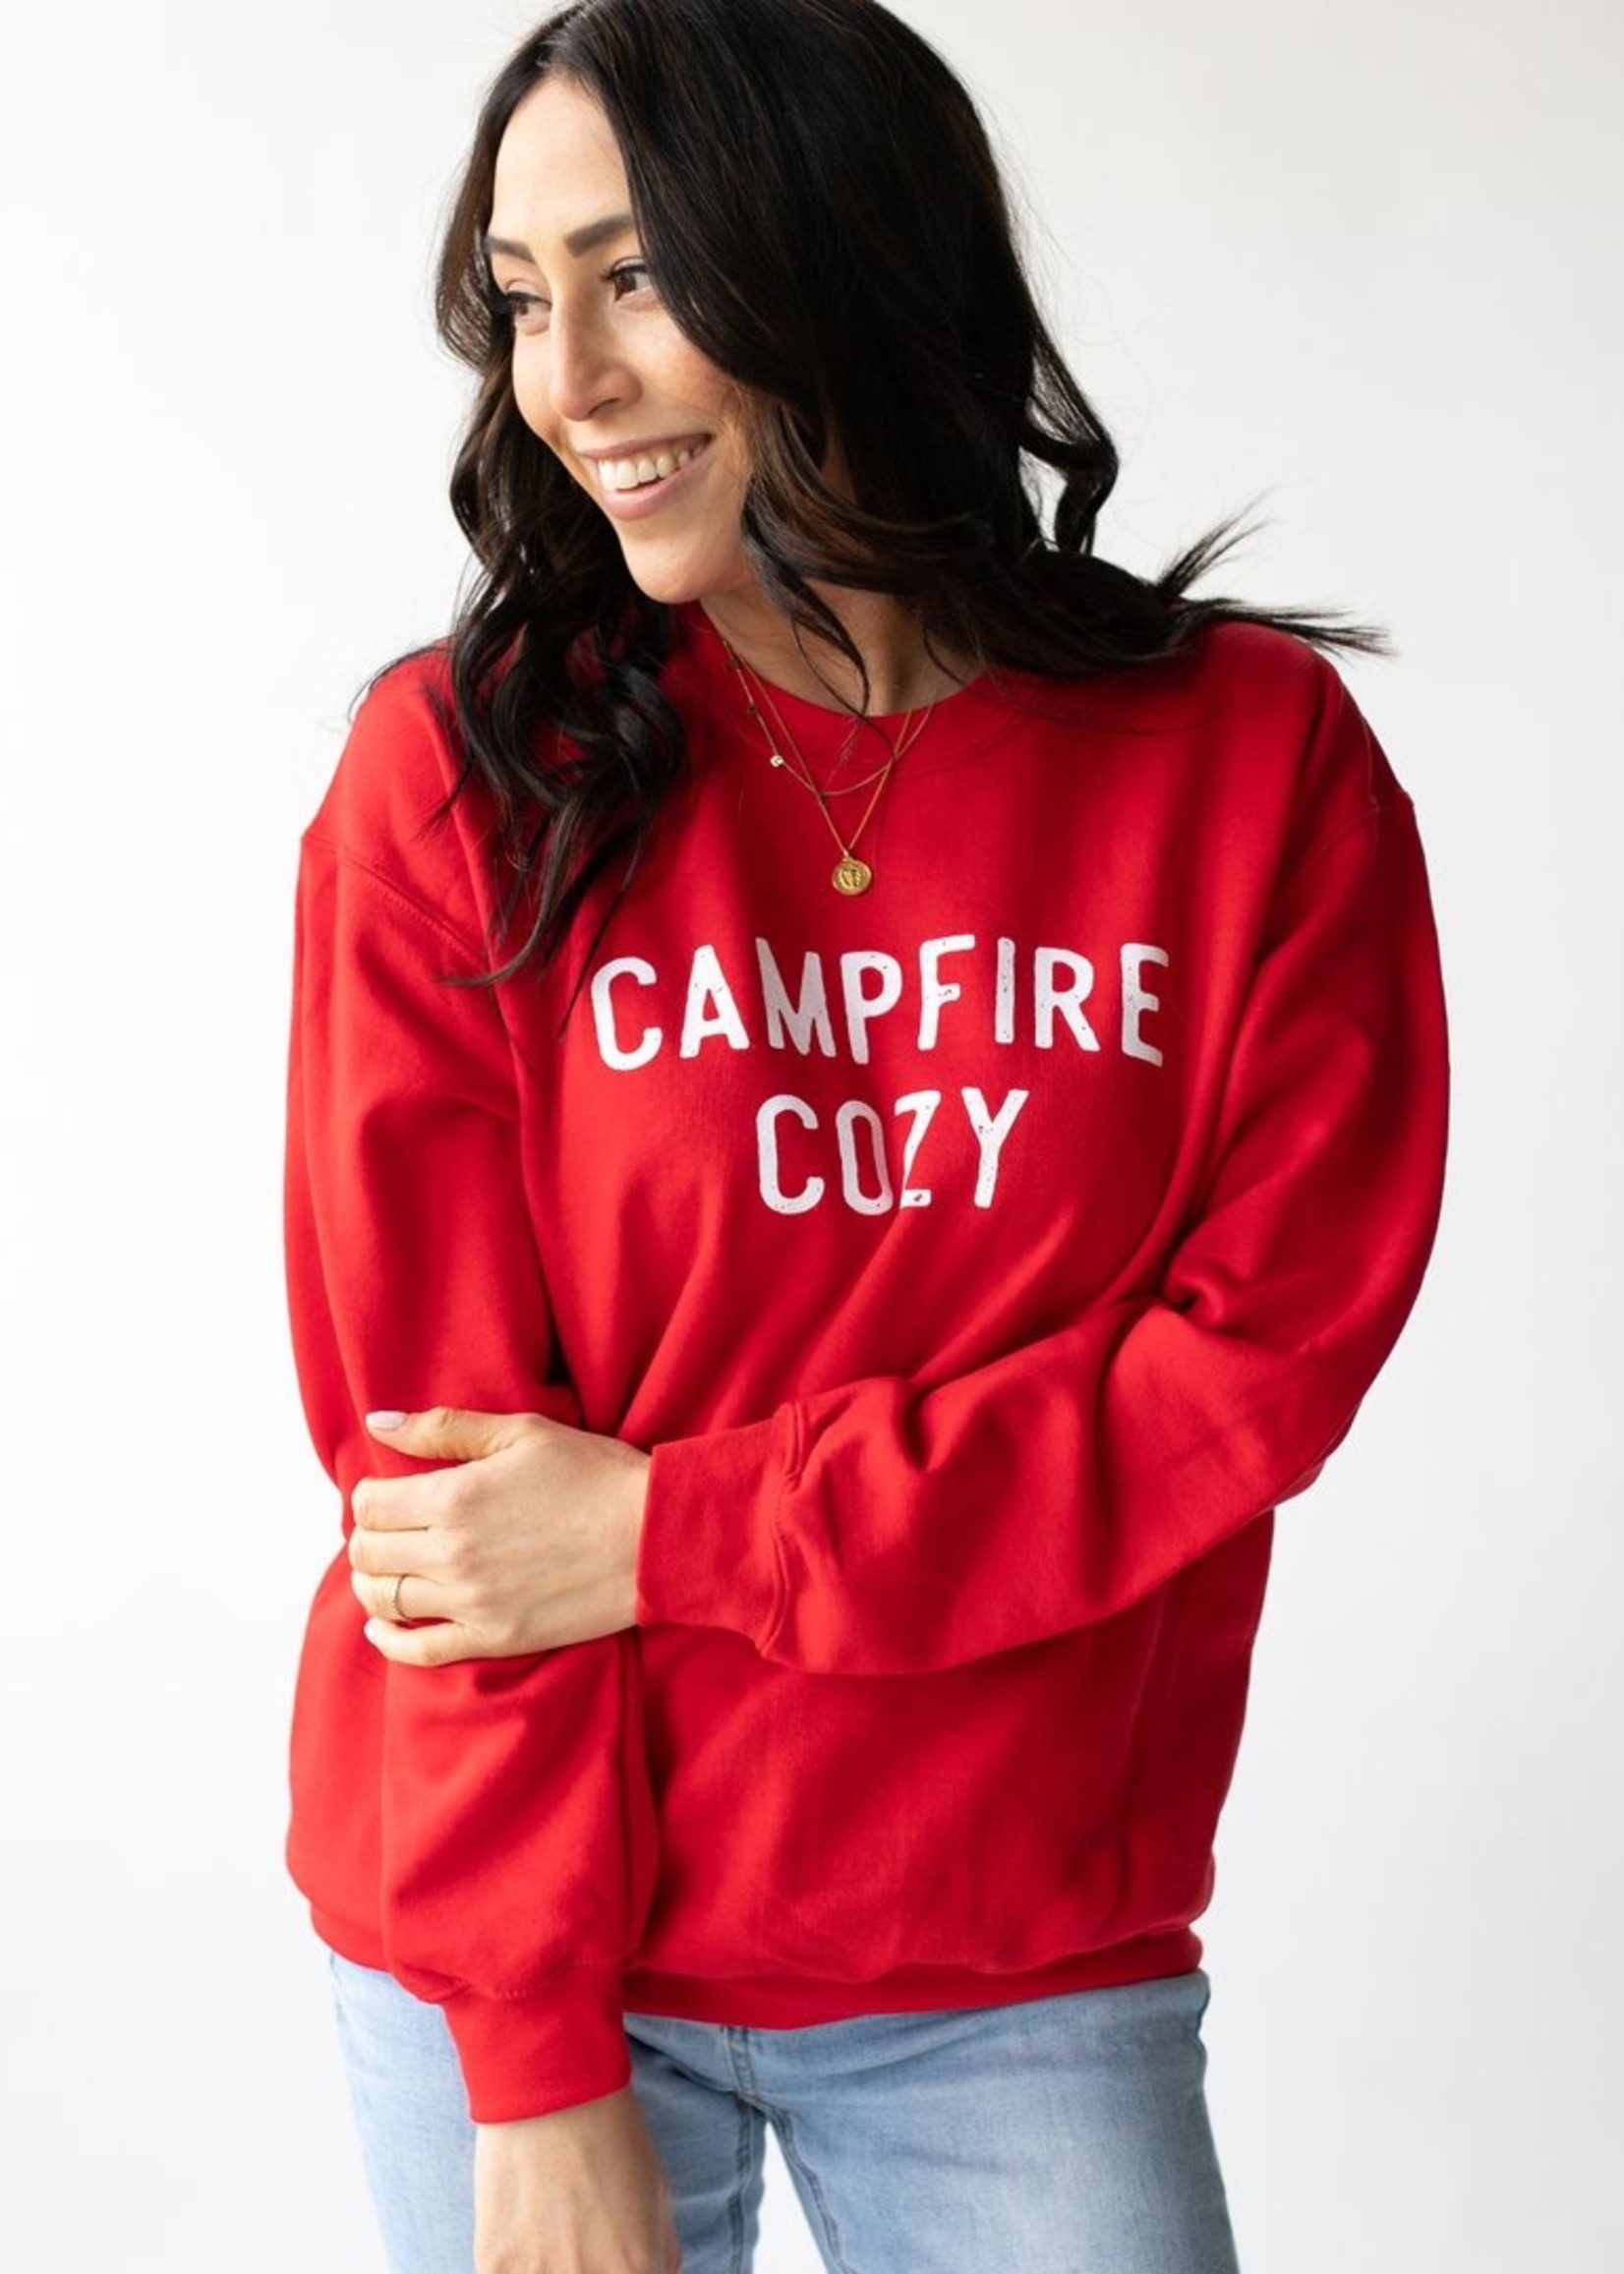 The Sweet Life Apparel & Gifts Campfire Cozy Pullover